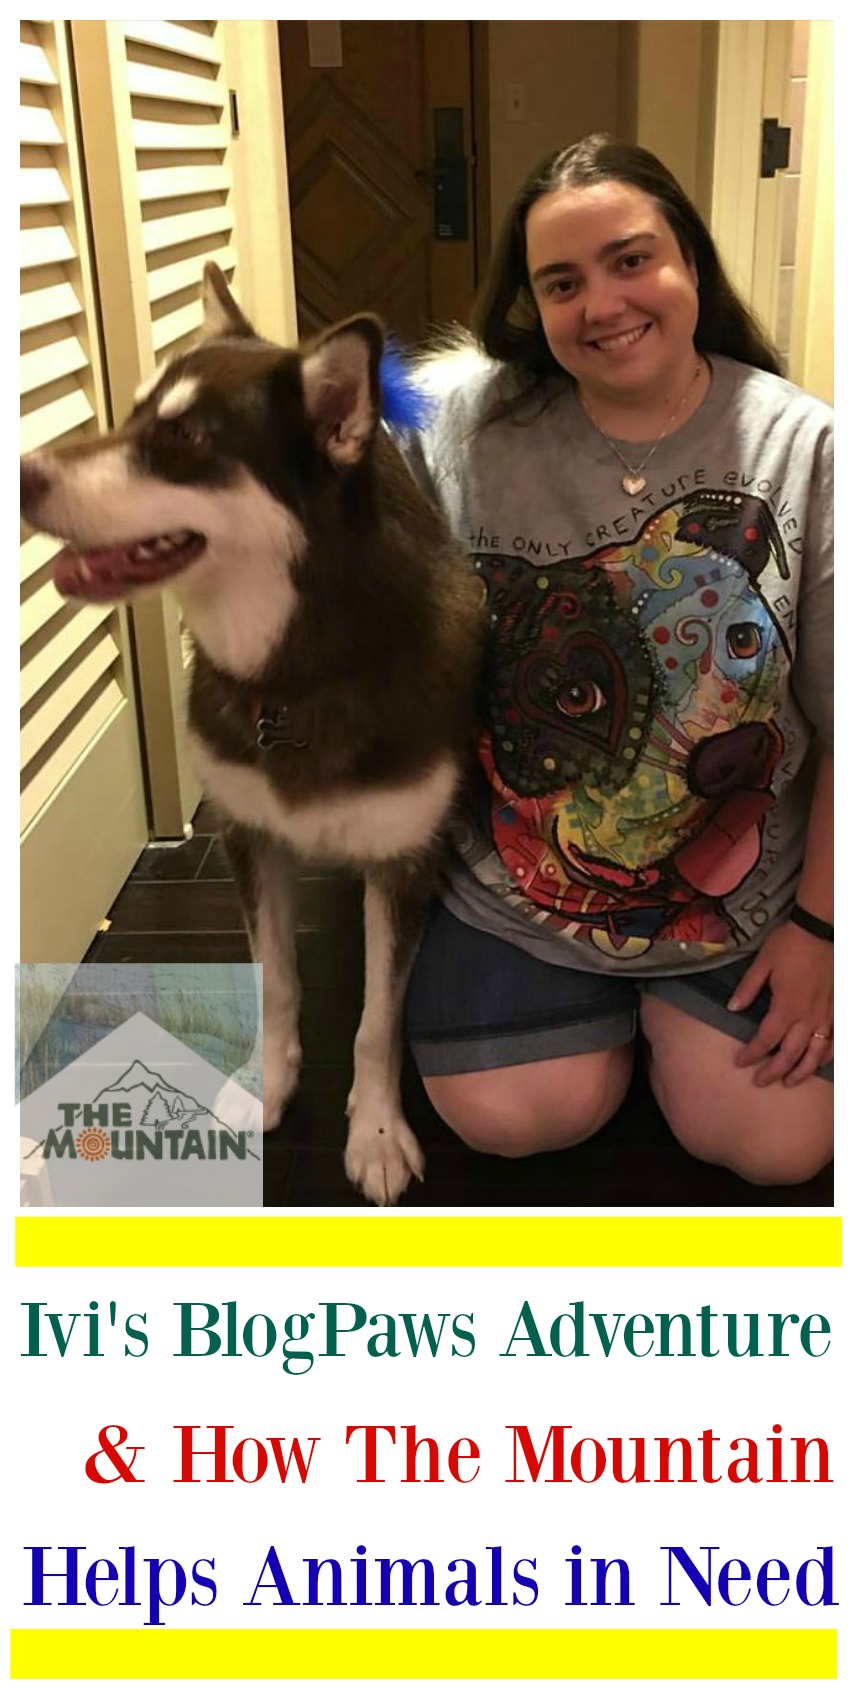 Ivi's #BlogPaws Adventure & How The Mountain Helps Animals in Need